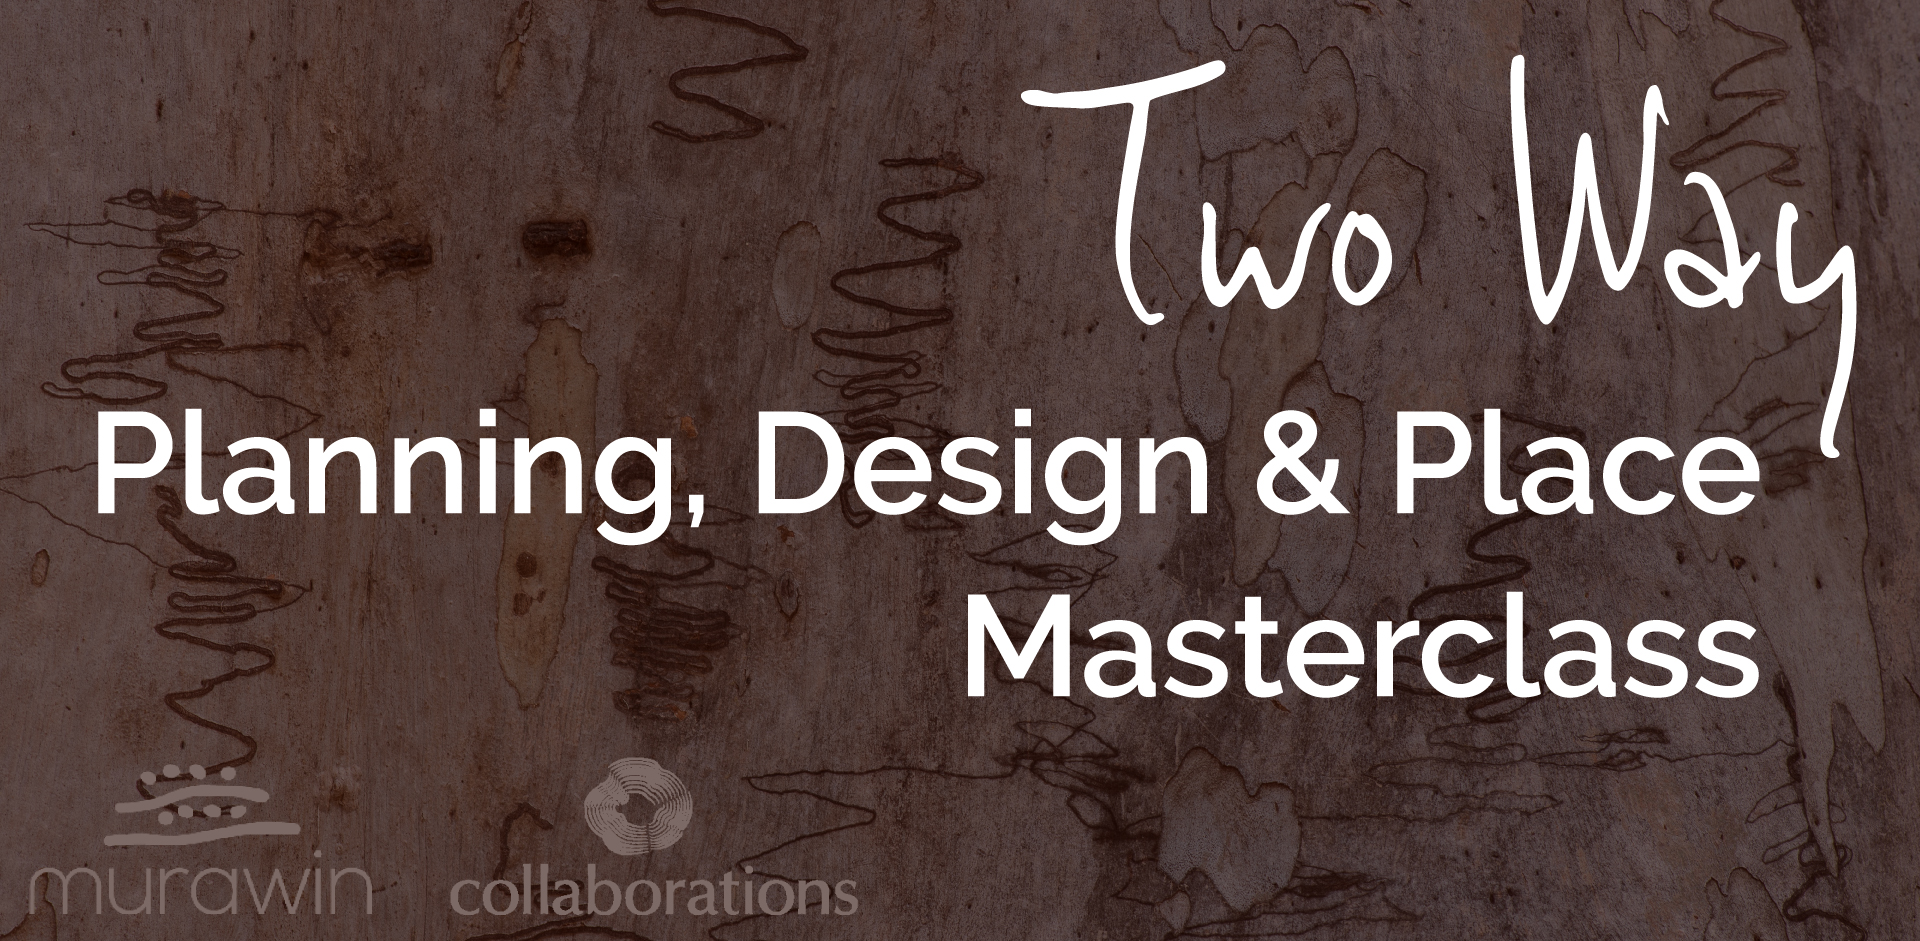 Two Way Planning, Design and Place Masterclass Banner